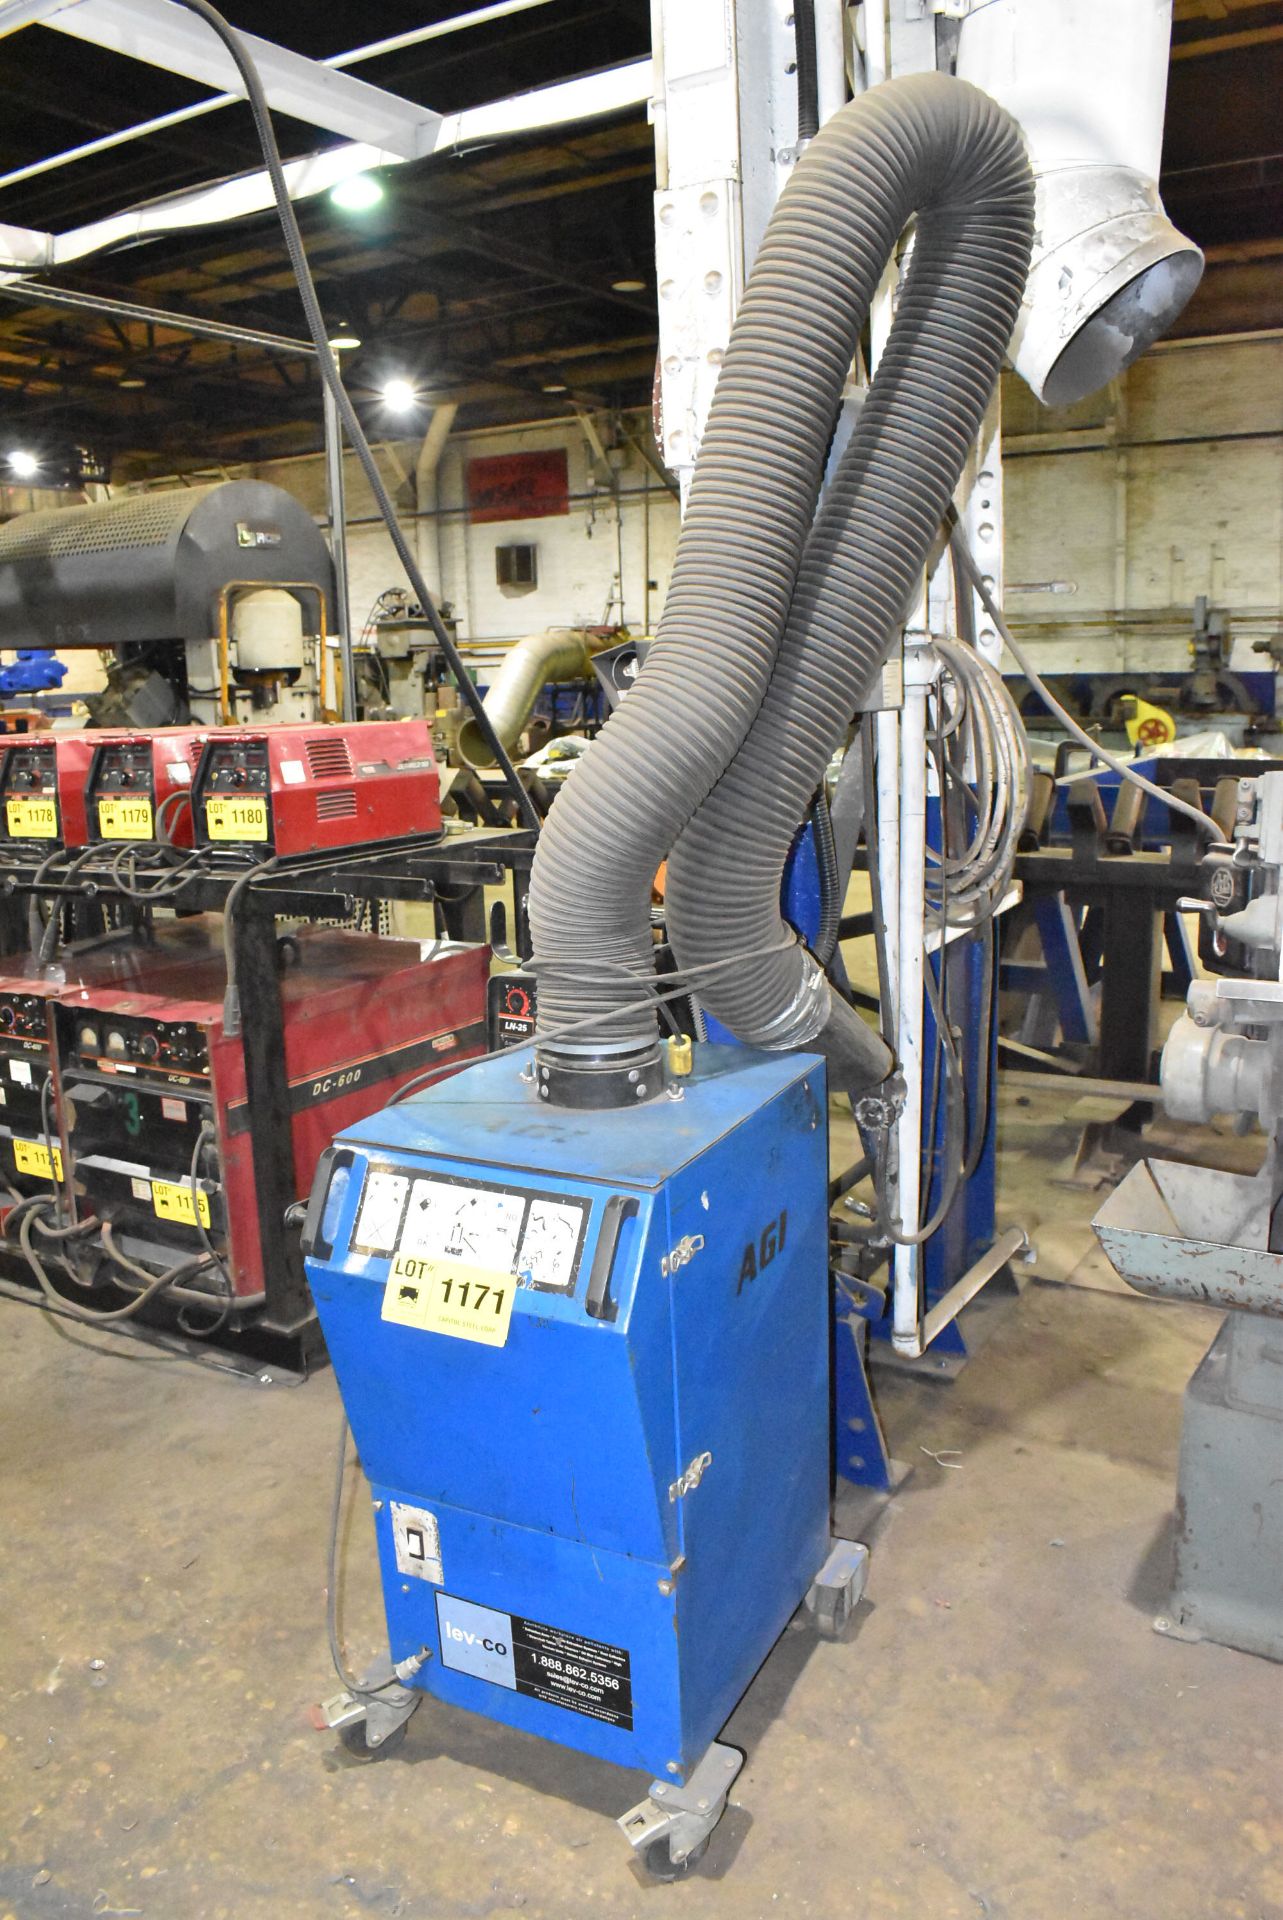 LEV-CO PORTABLE WELDING FUME EXTRACTOR WITH OVERHEAD SNORKEL-TYPE EXTRACTION ARM, S/N: N/A [